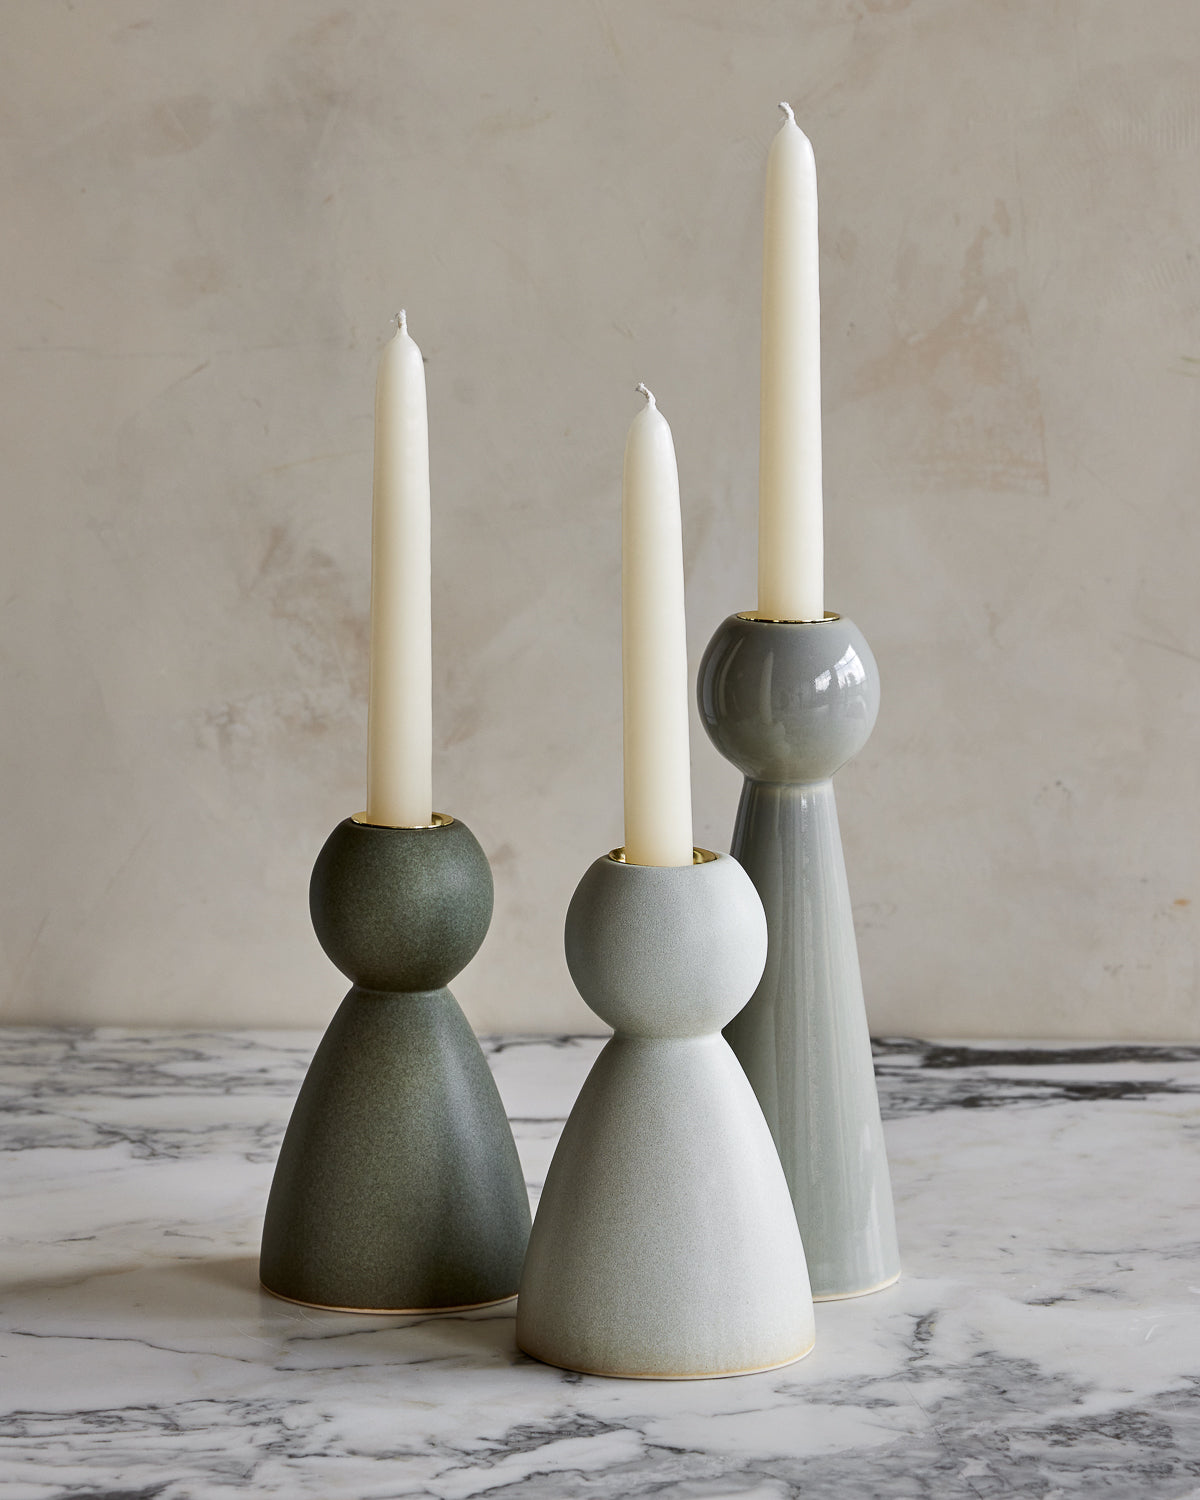 Collection of blue and green ceramic candle holders of various styles and glazes with white taper candles